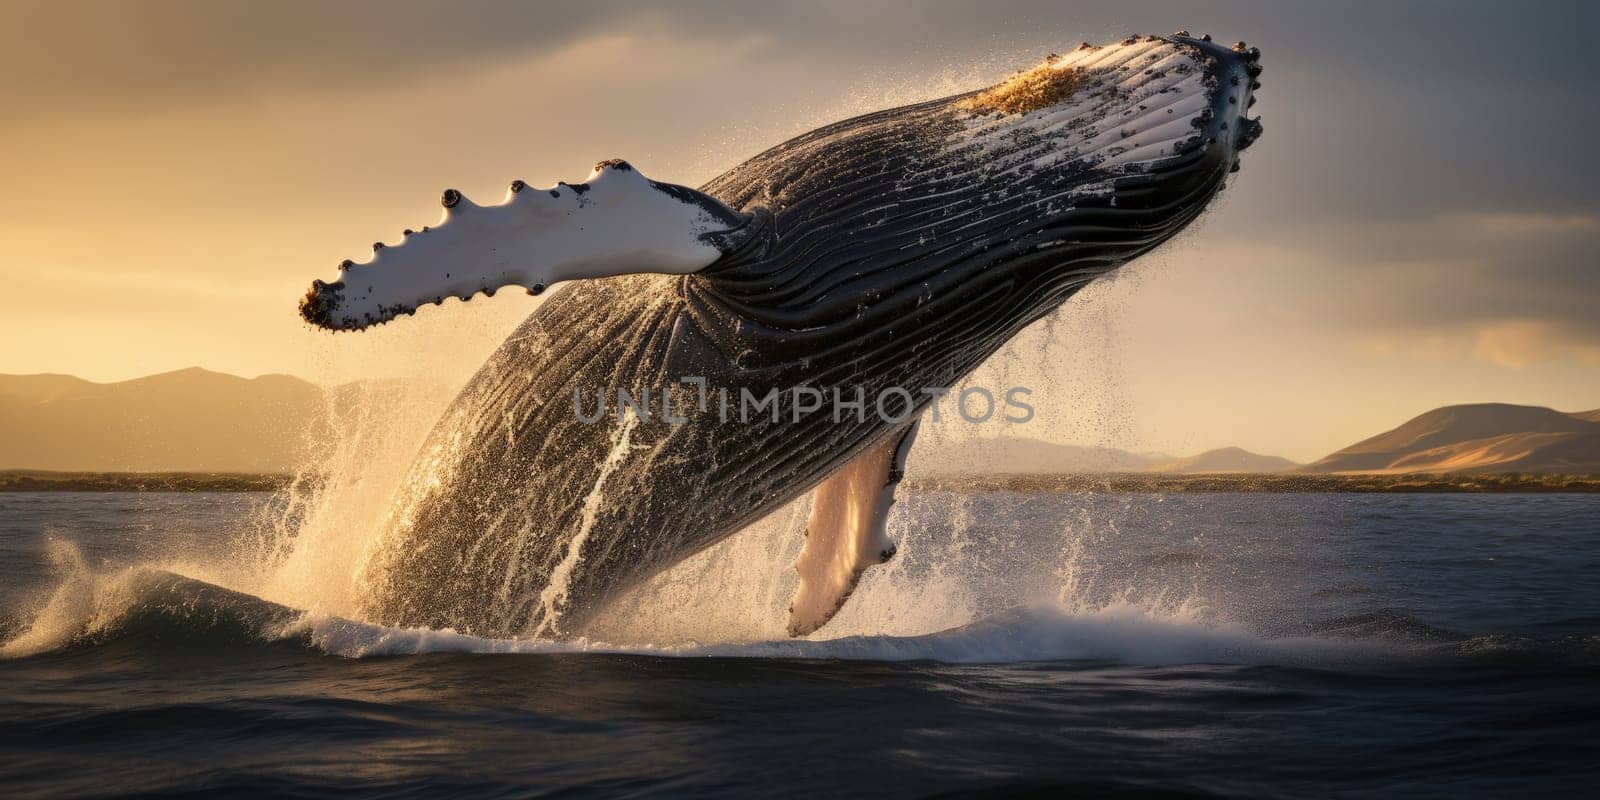 A majestic whale leaping a gracefully out of the water, sunlight glistening on its wet skin, capturing the sheer power and beauty of the ocean giant by Kadula